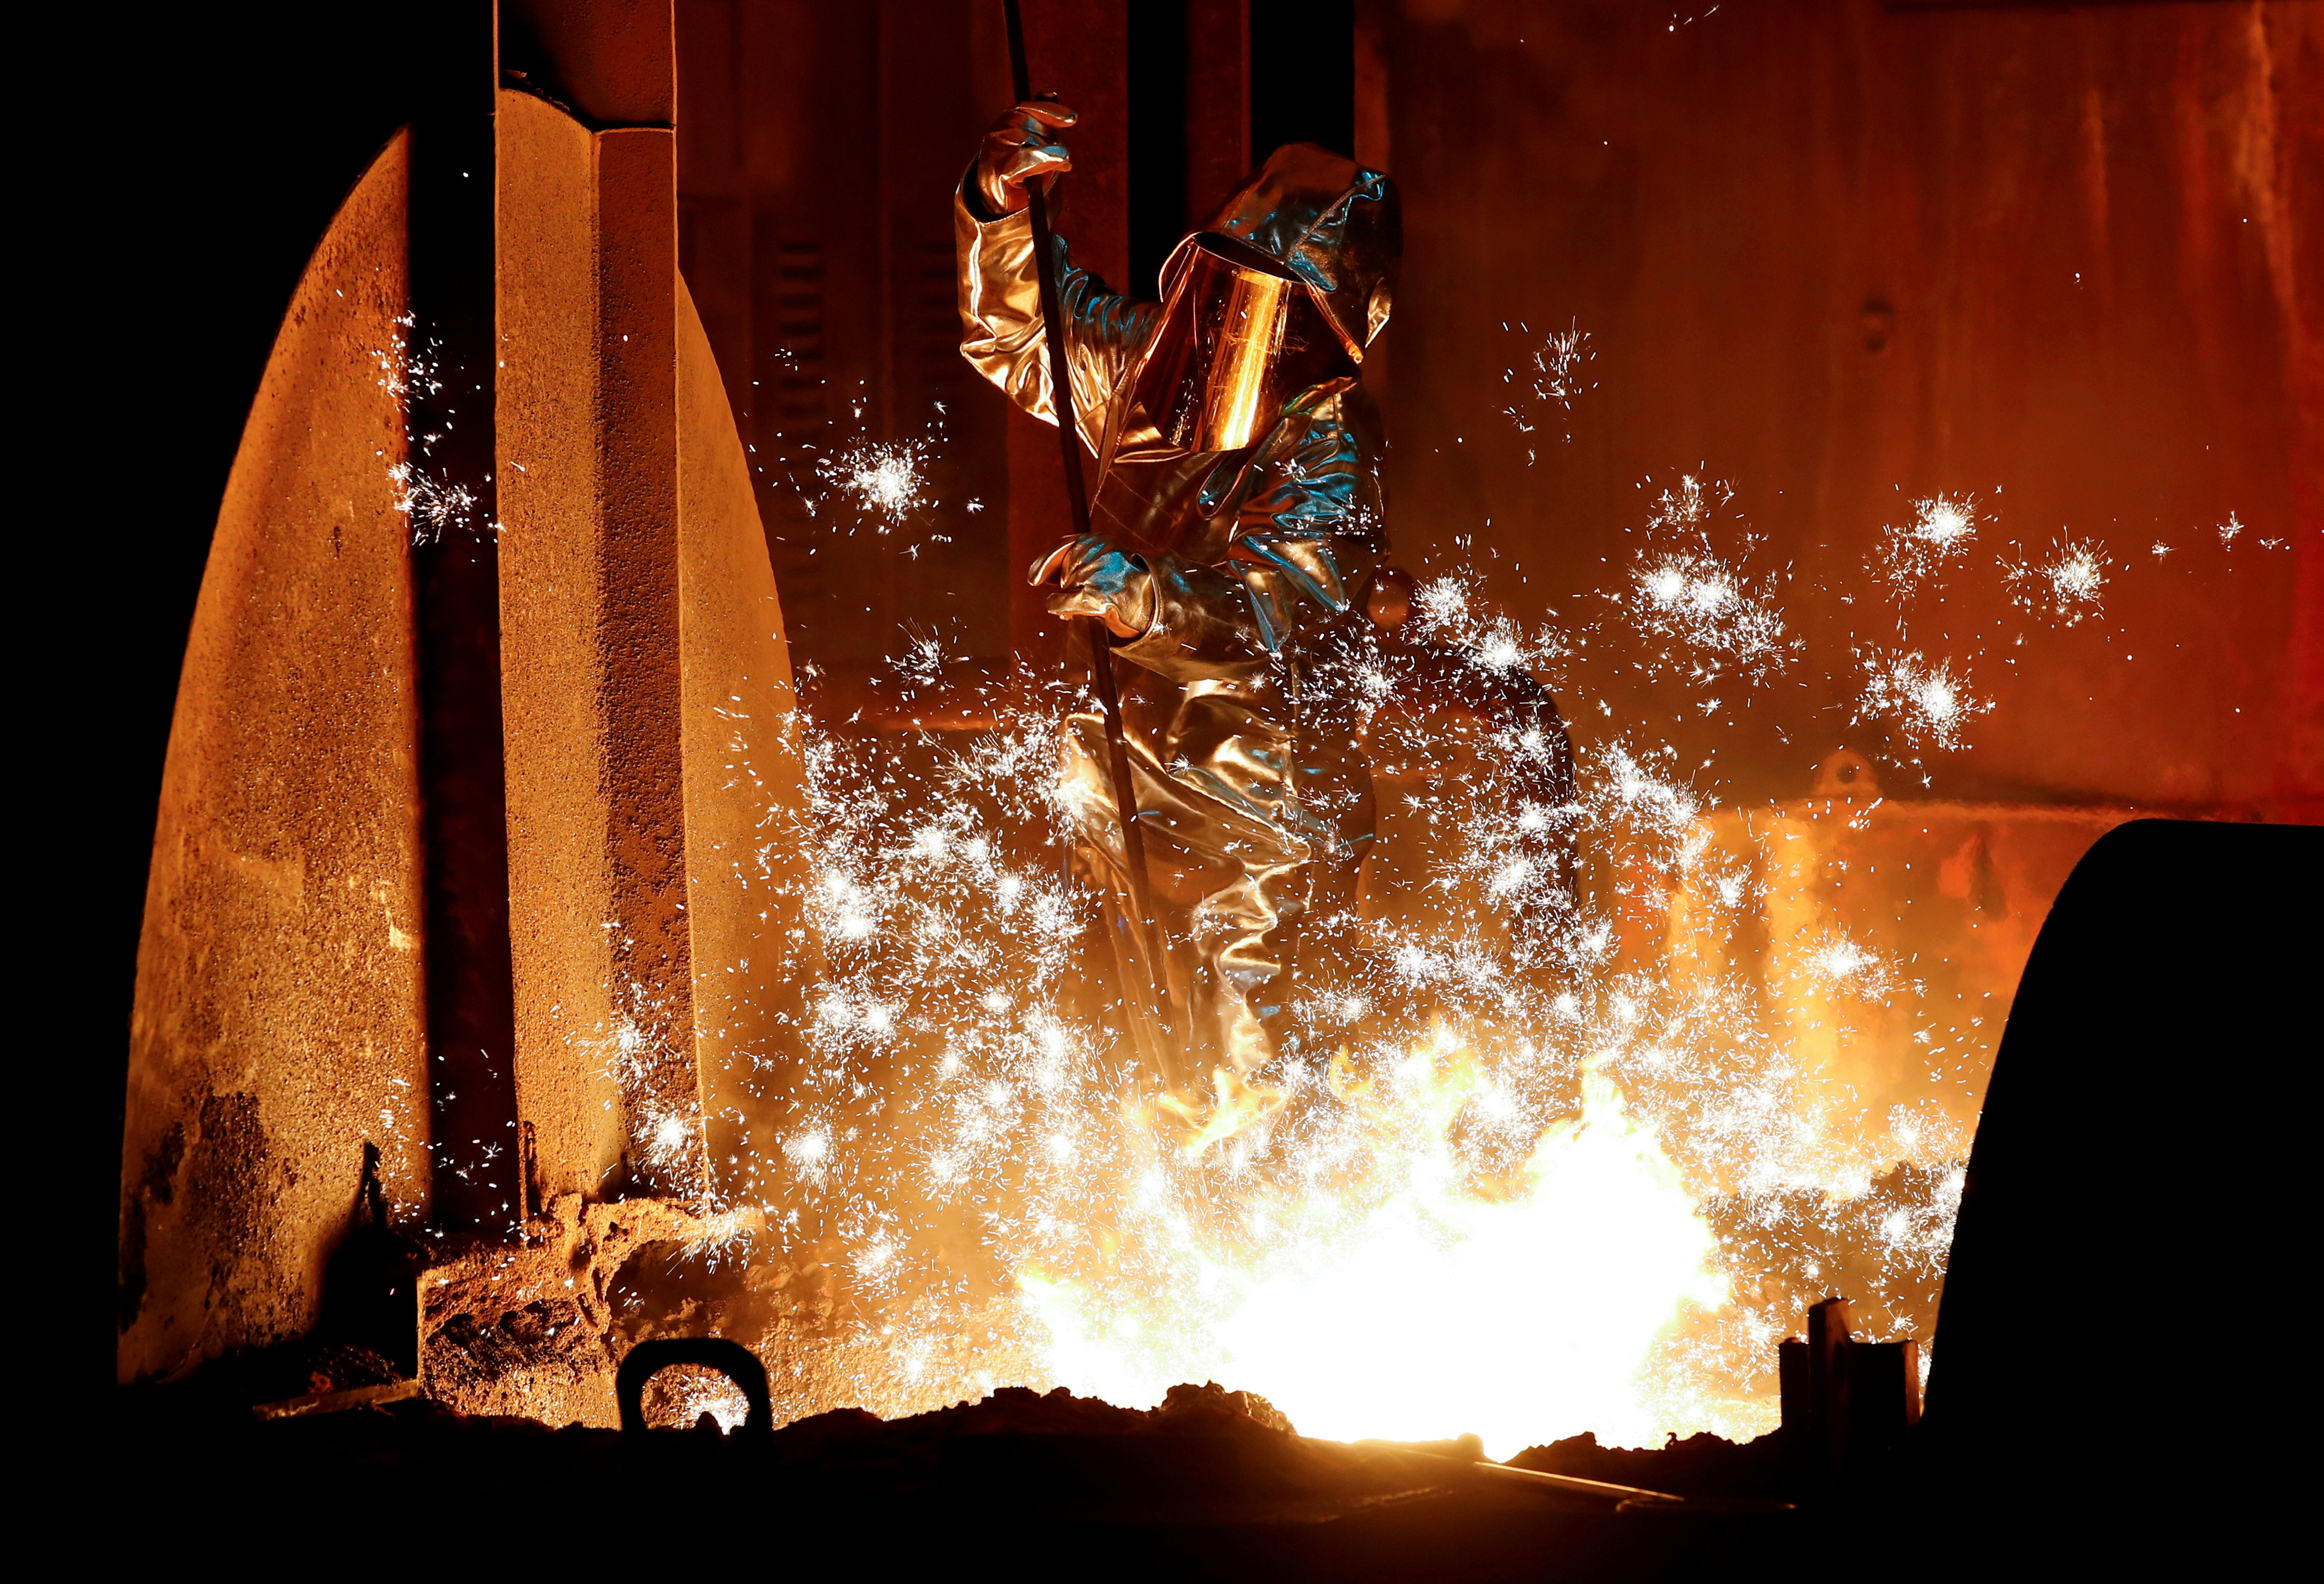 A steel worker of Germany's industrial conglomerate ThyssenKrupp AG takes a sample of raw iron from a blast furnace at Europe's largest steel factory in Duisburg